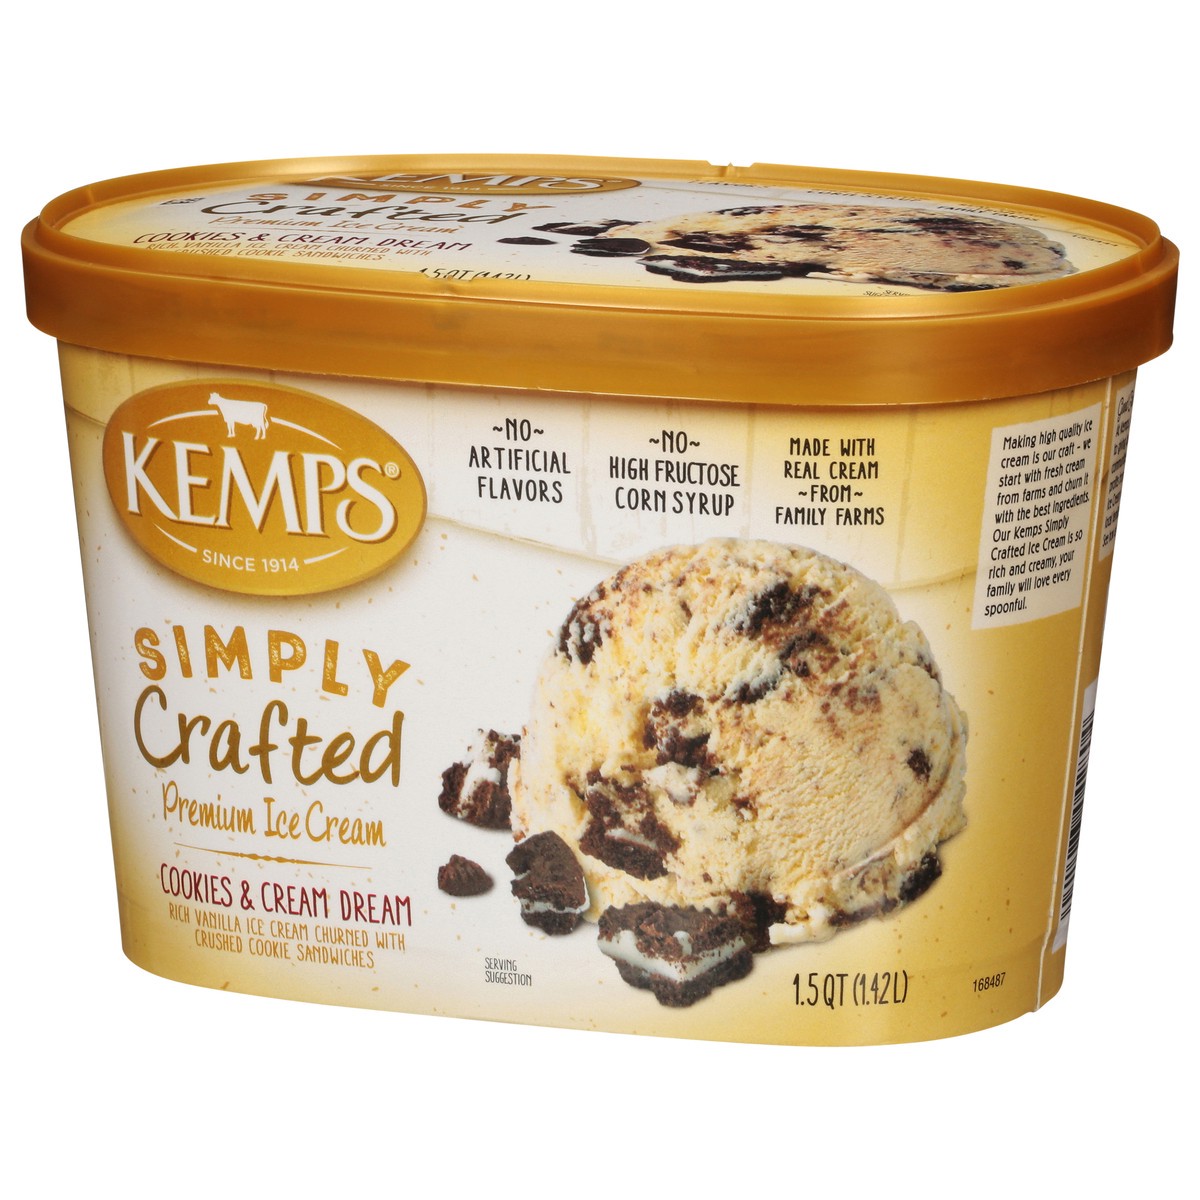 slide 3 of 9, Kemps Cookies & Creme Simply Crafted Ice Cream, 1.5 qt